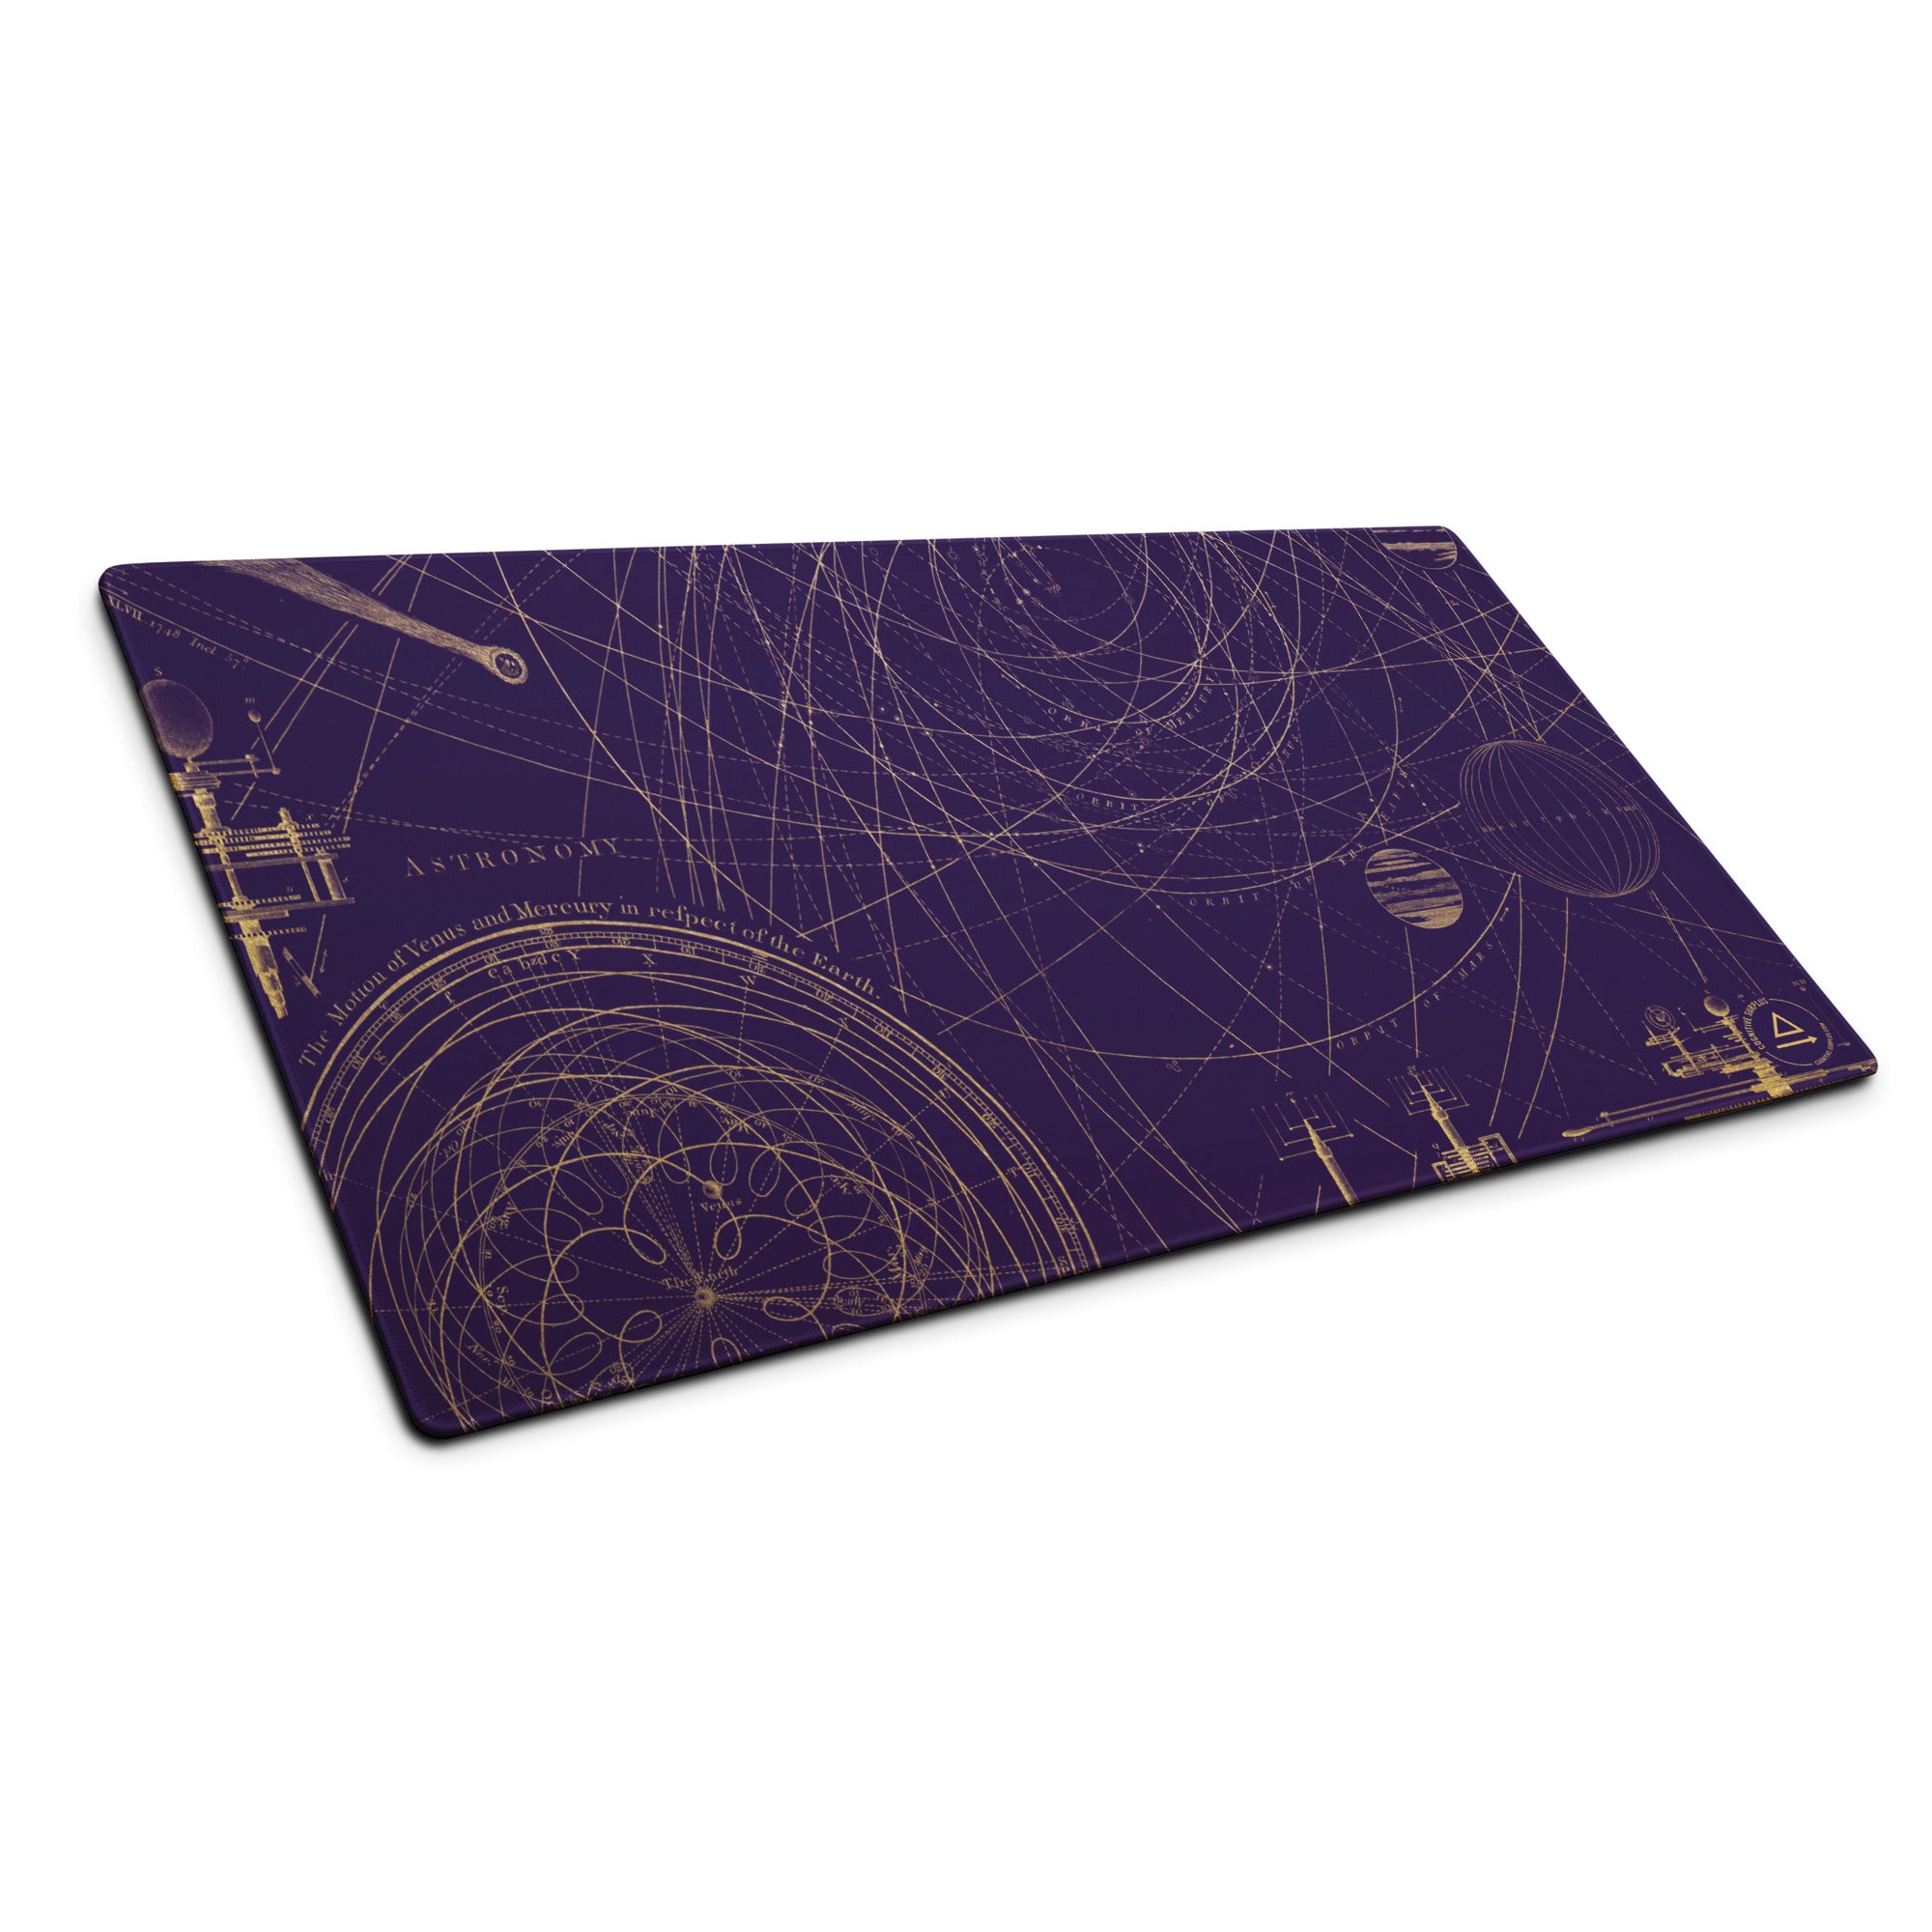 gaming-mouse-pad-white-36x18-front-6573521f51131.jpg